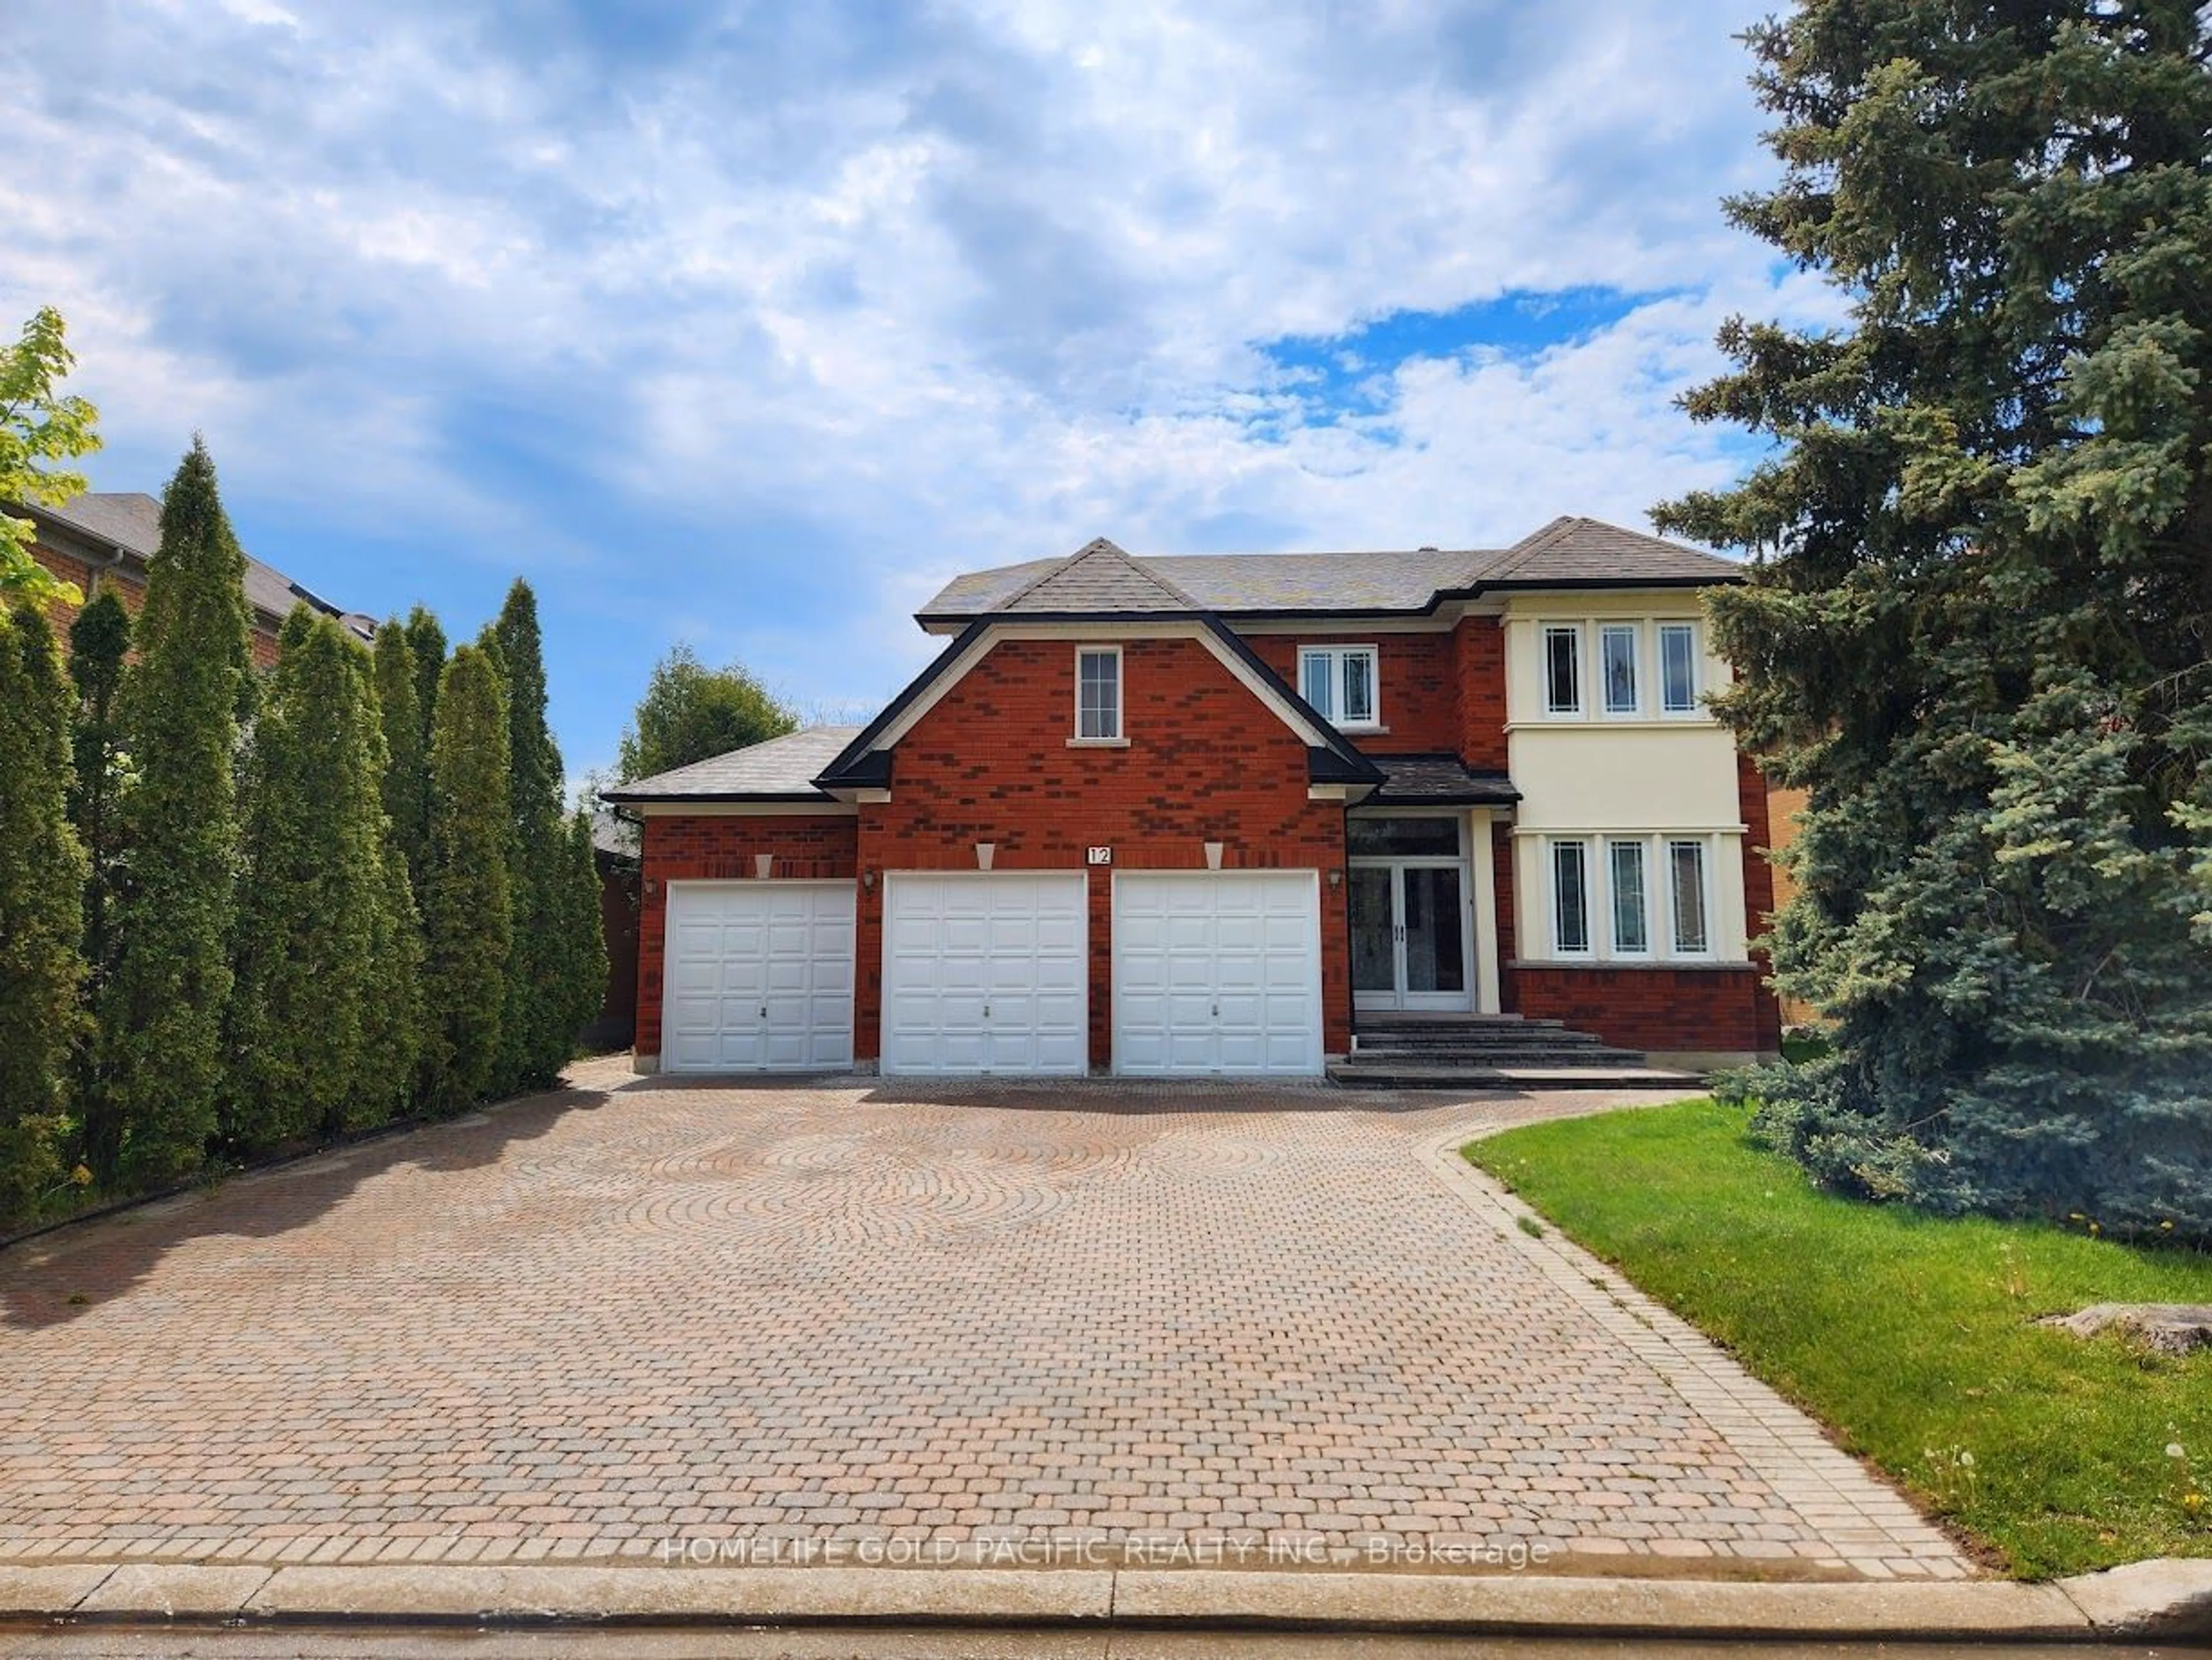 Home with brick exterior material for 12 Silver Fir St, Richmond Hill Ontario L4B 3R5